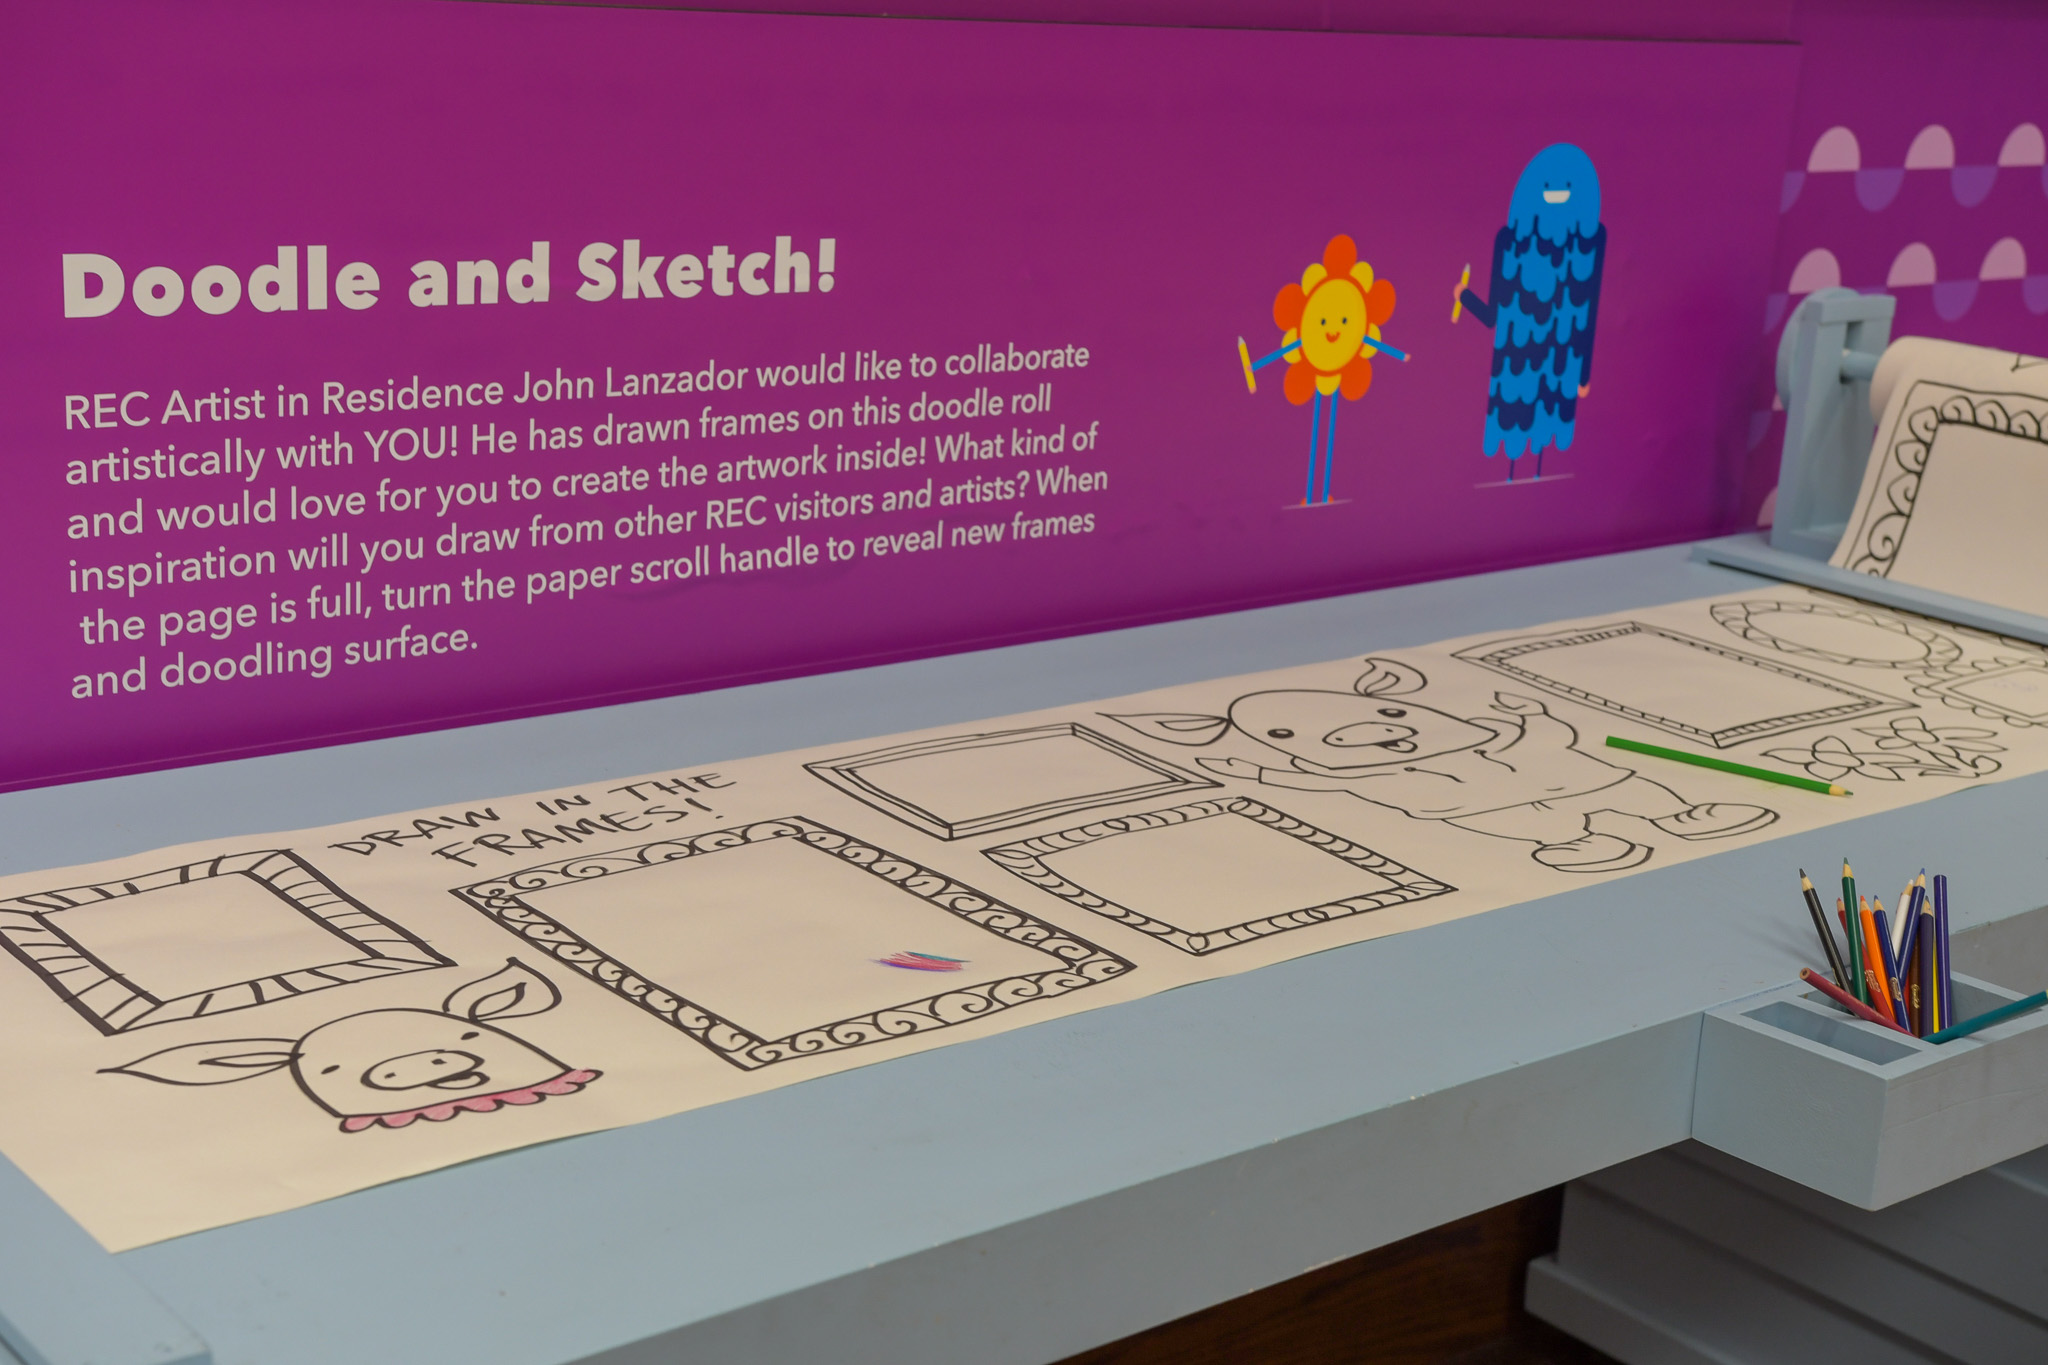 Doodle and sketch art-making table with prompts.